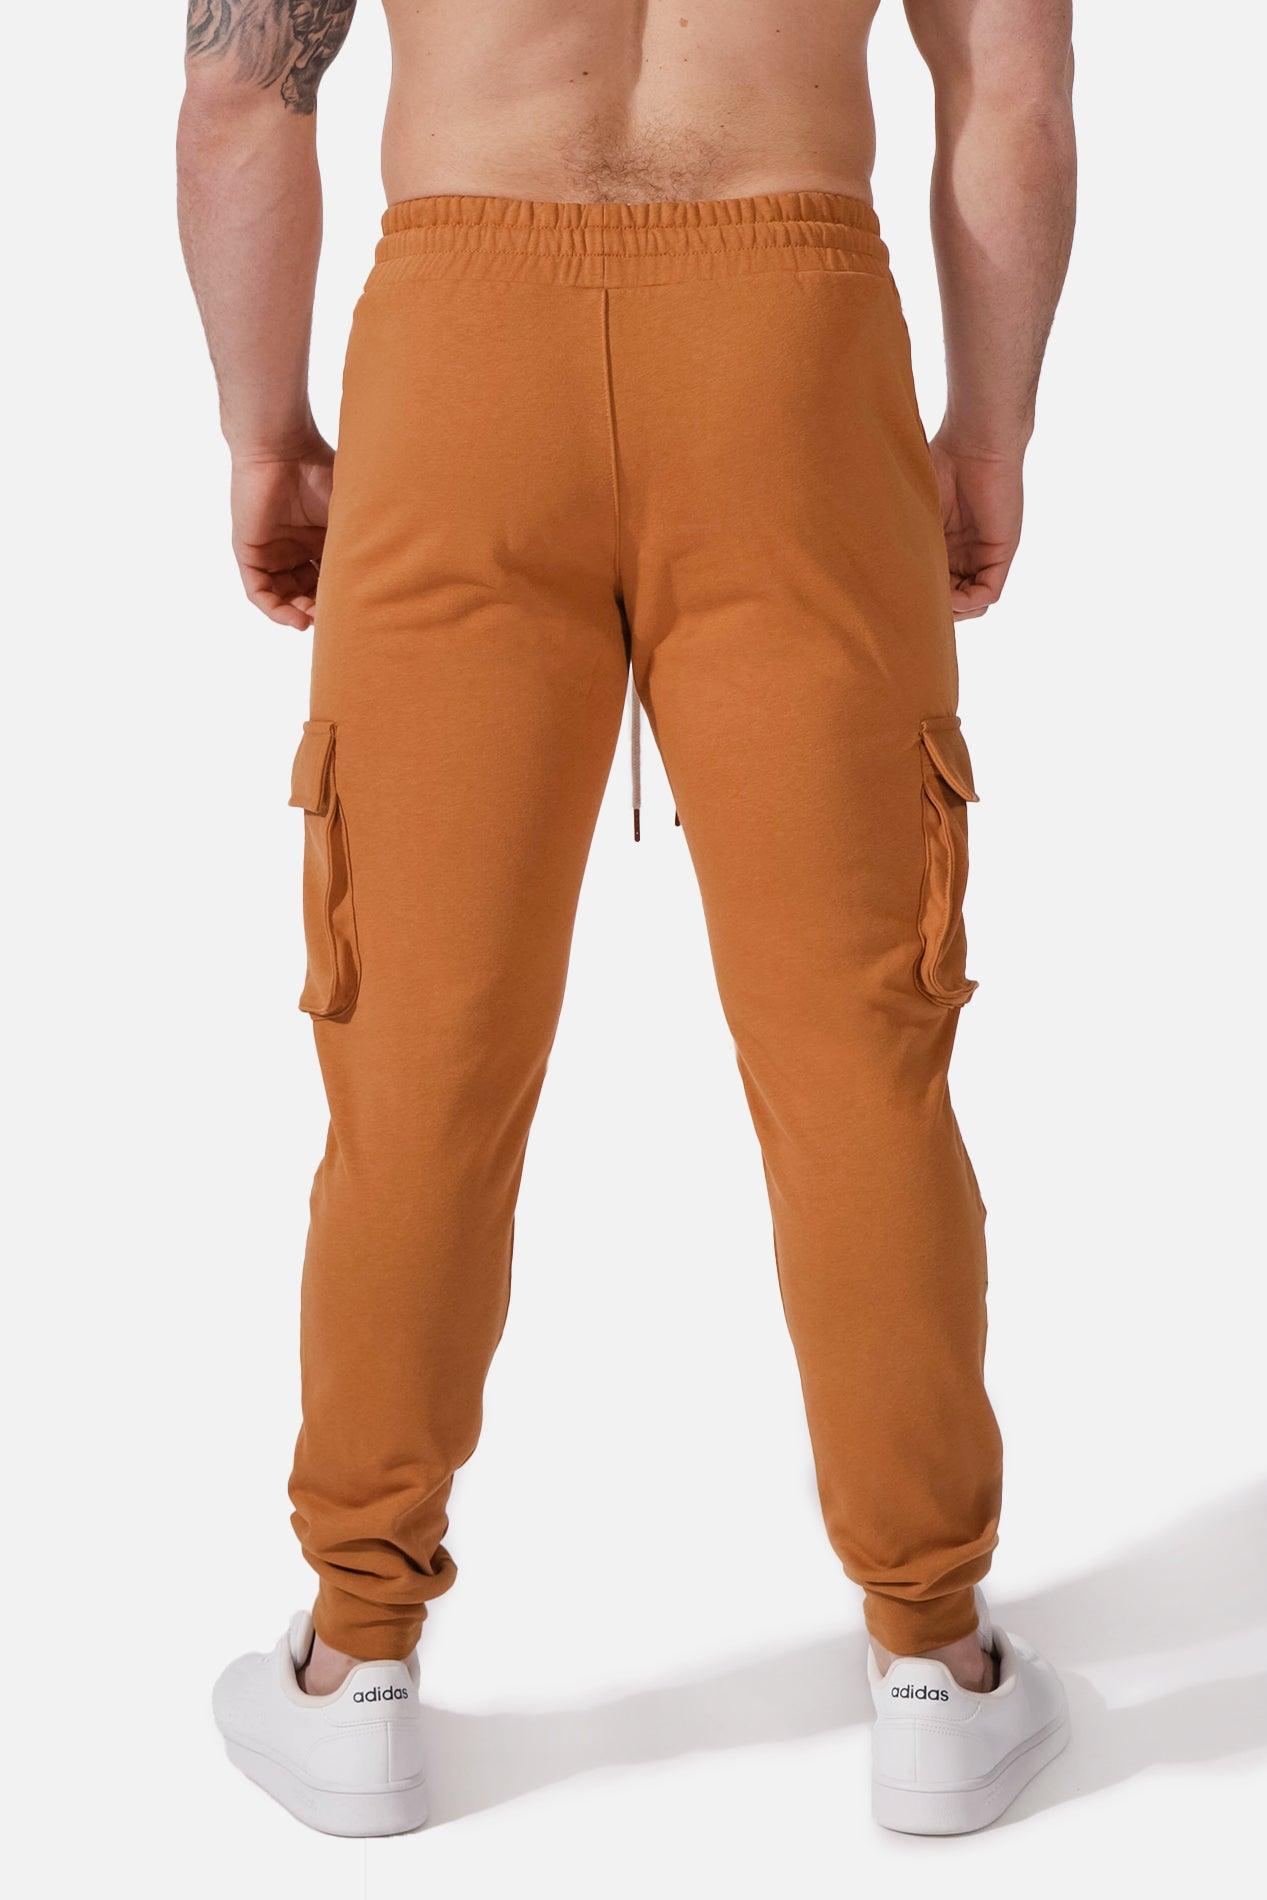 Renegade Cargo Joggers - Brown - Jed North